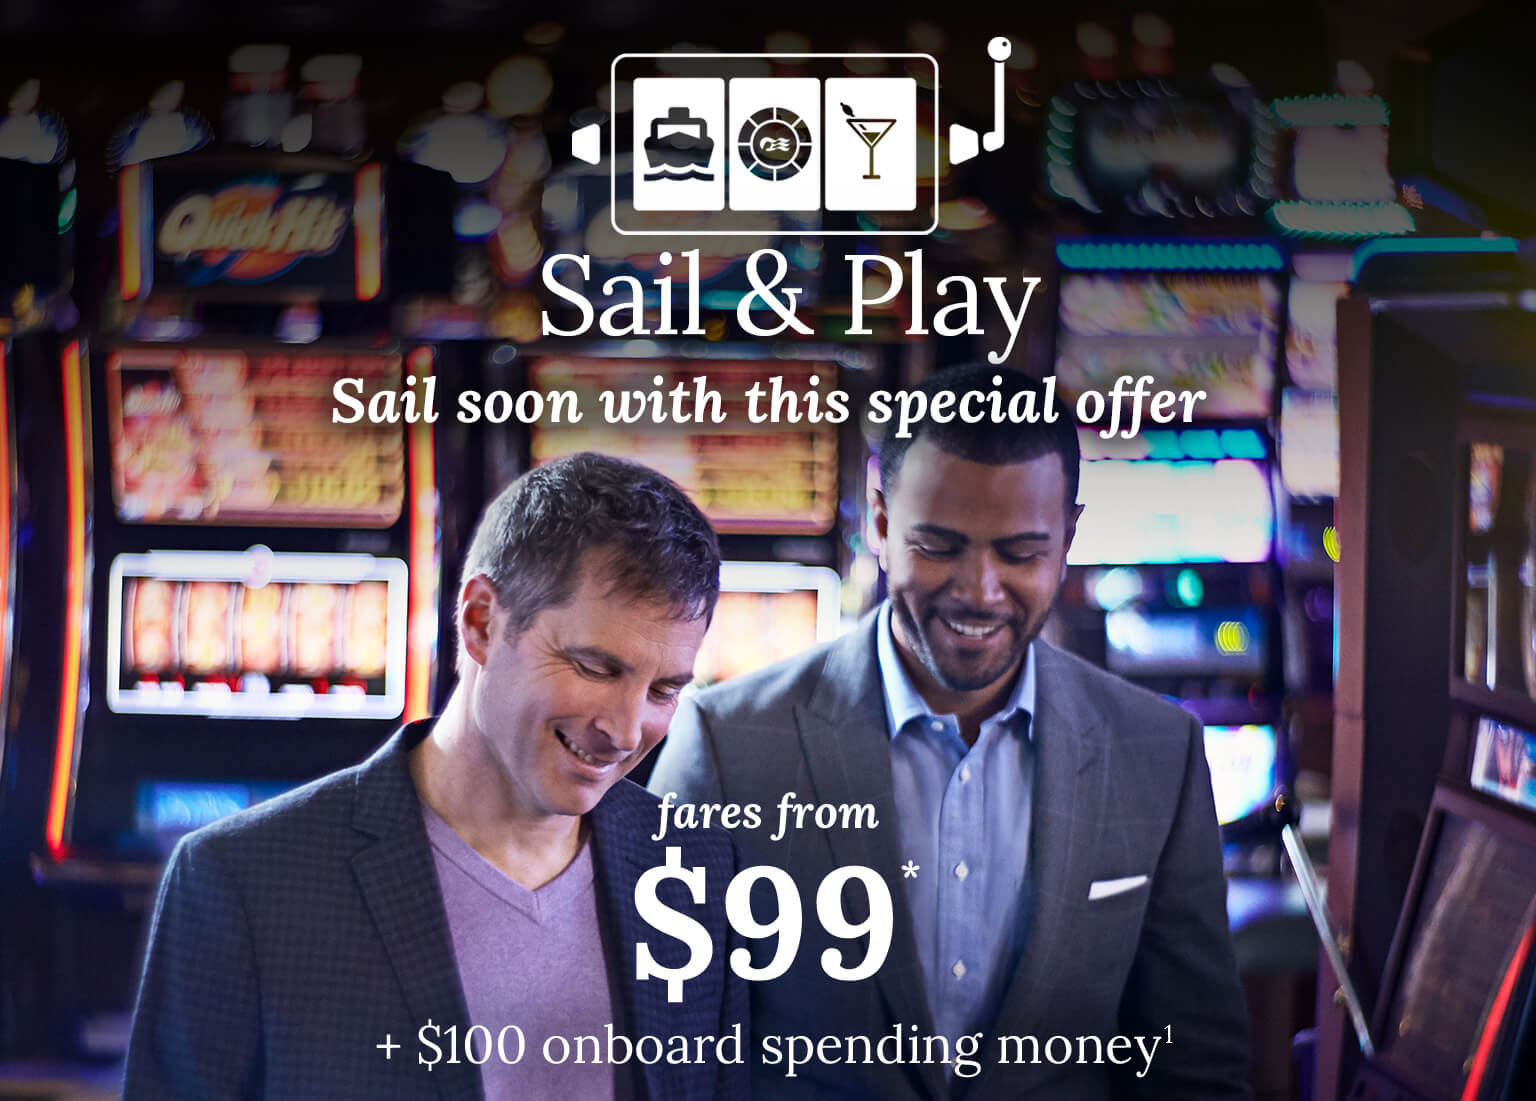 Fares from $99 + $100 onboard spending money. Click here to book.